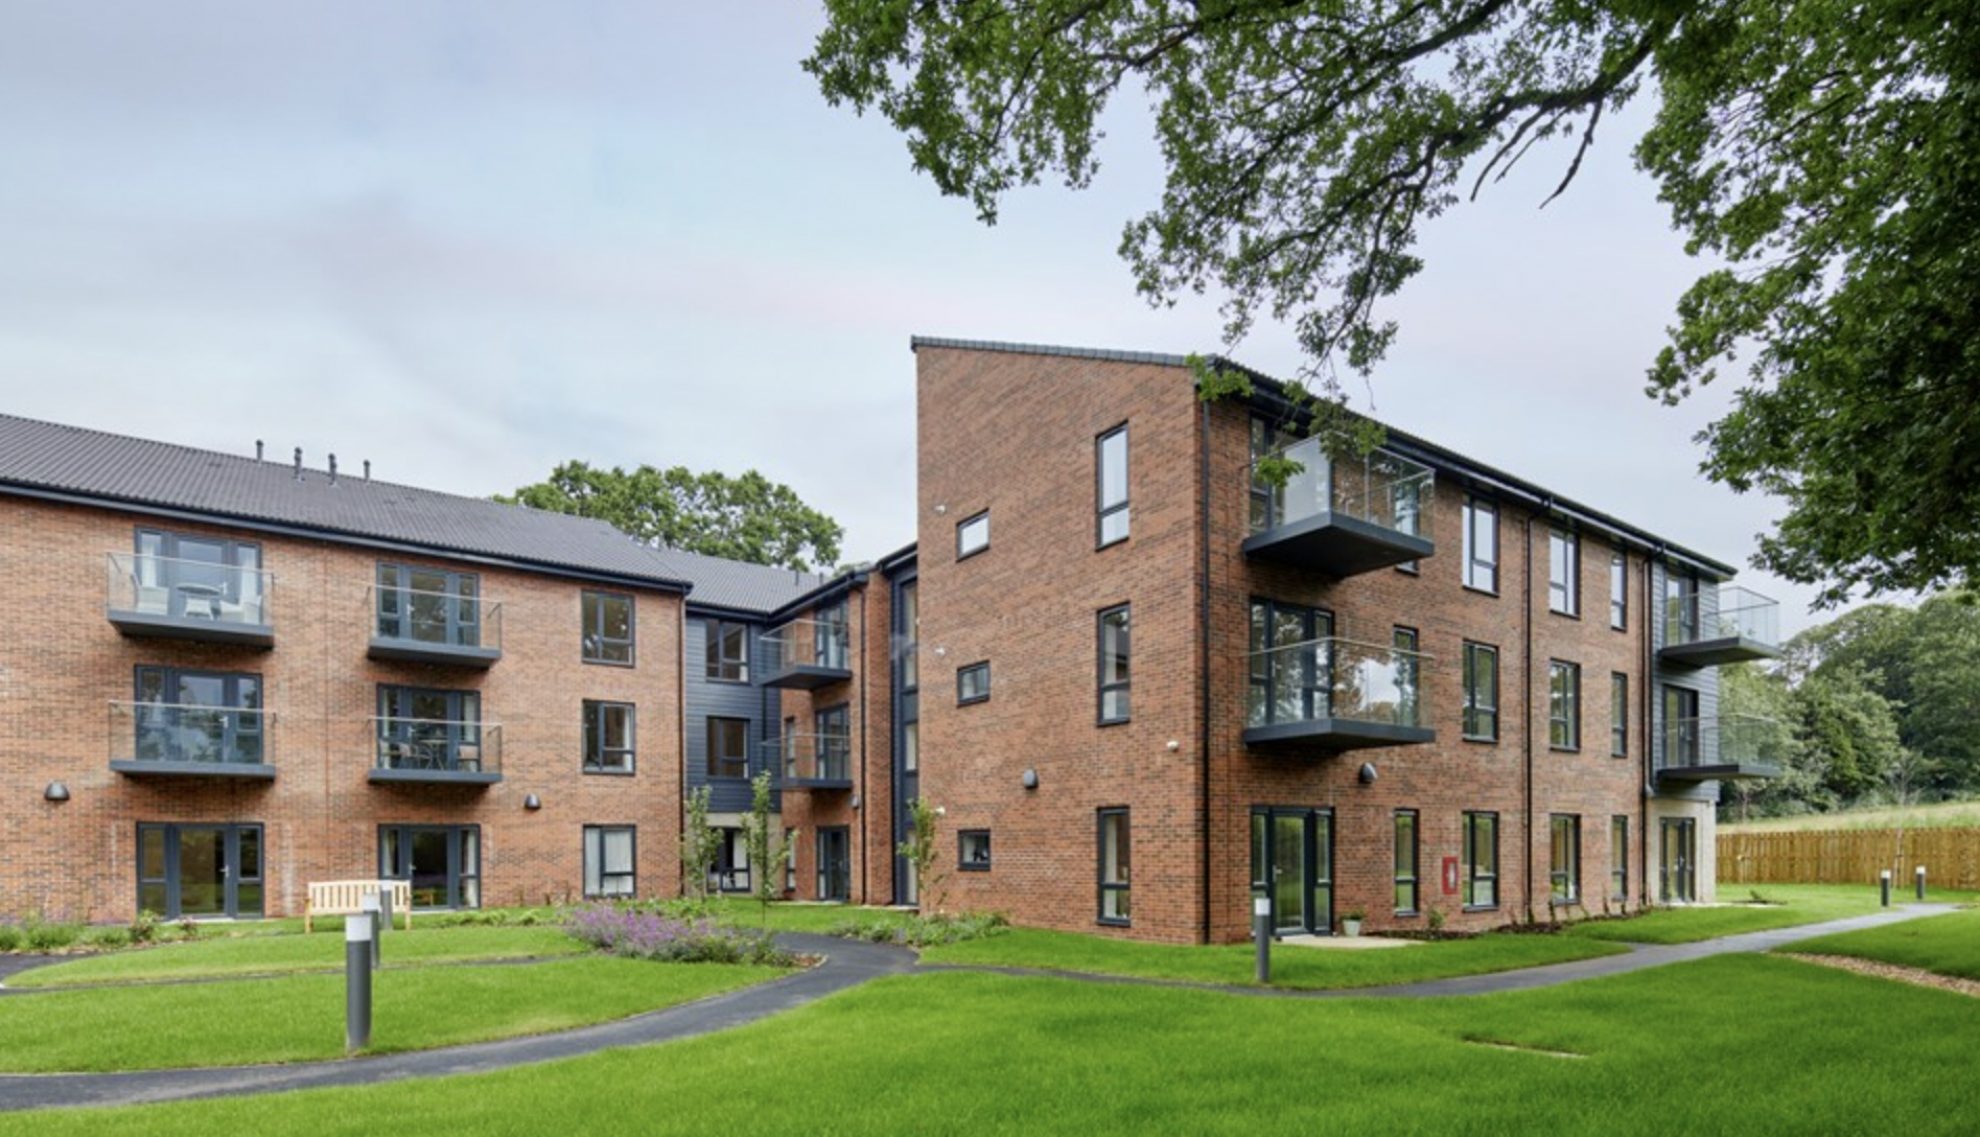 Fry Court, TS9 by Housing 21